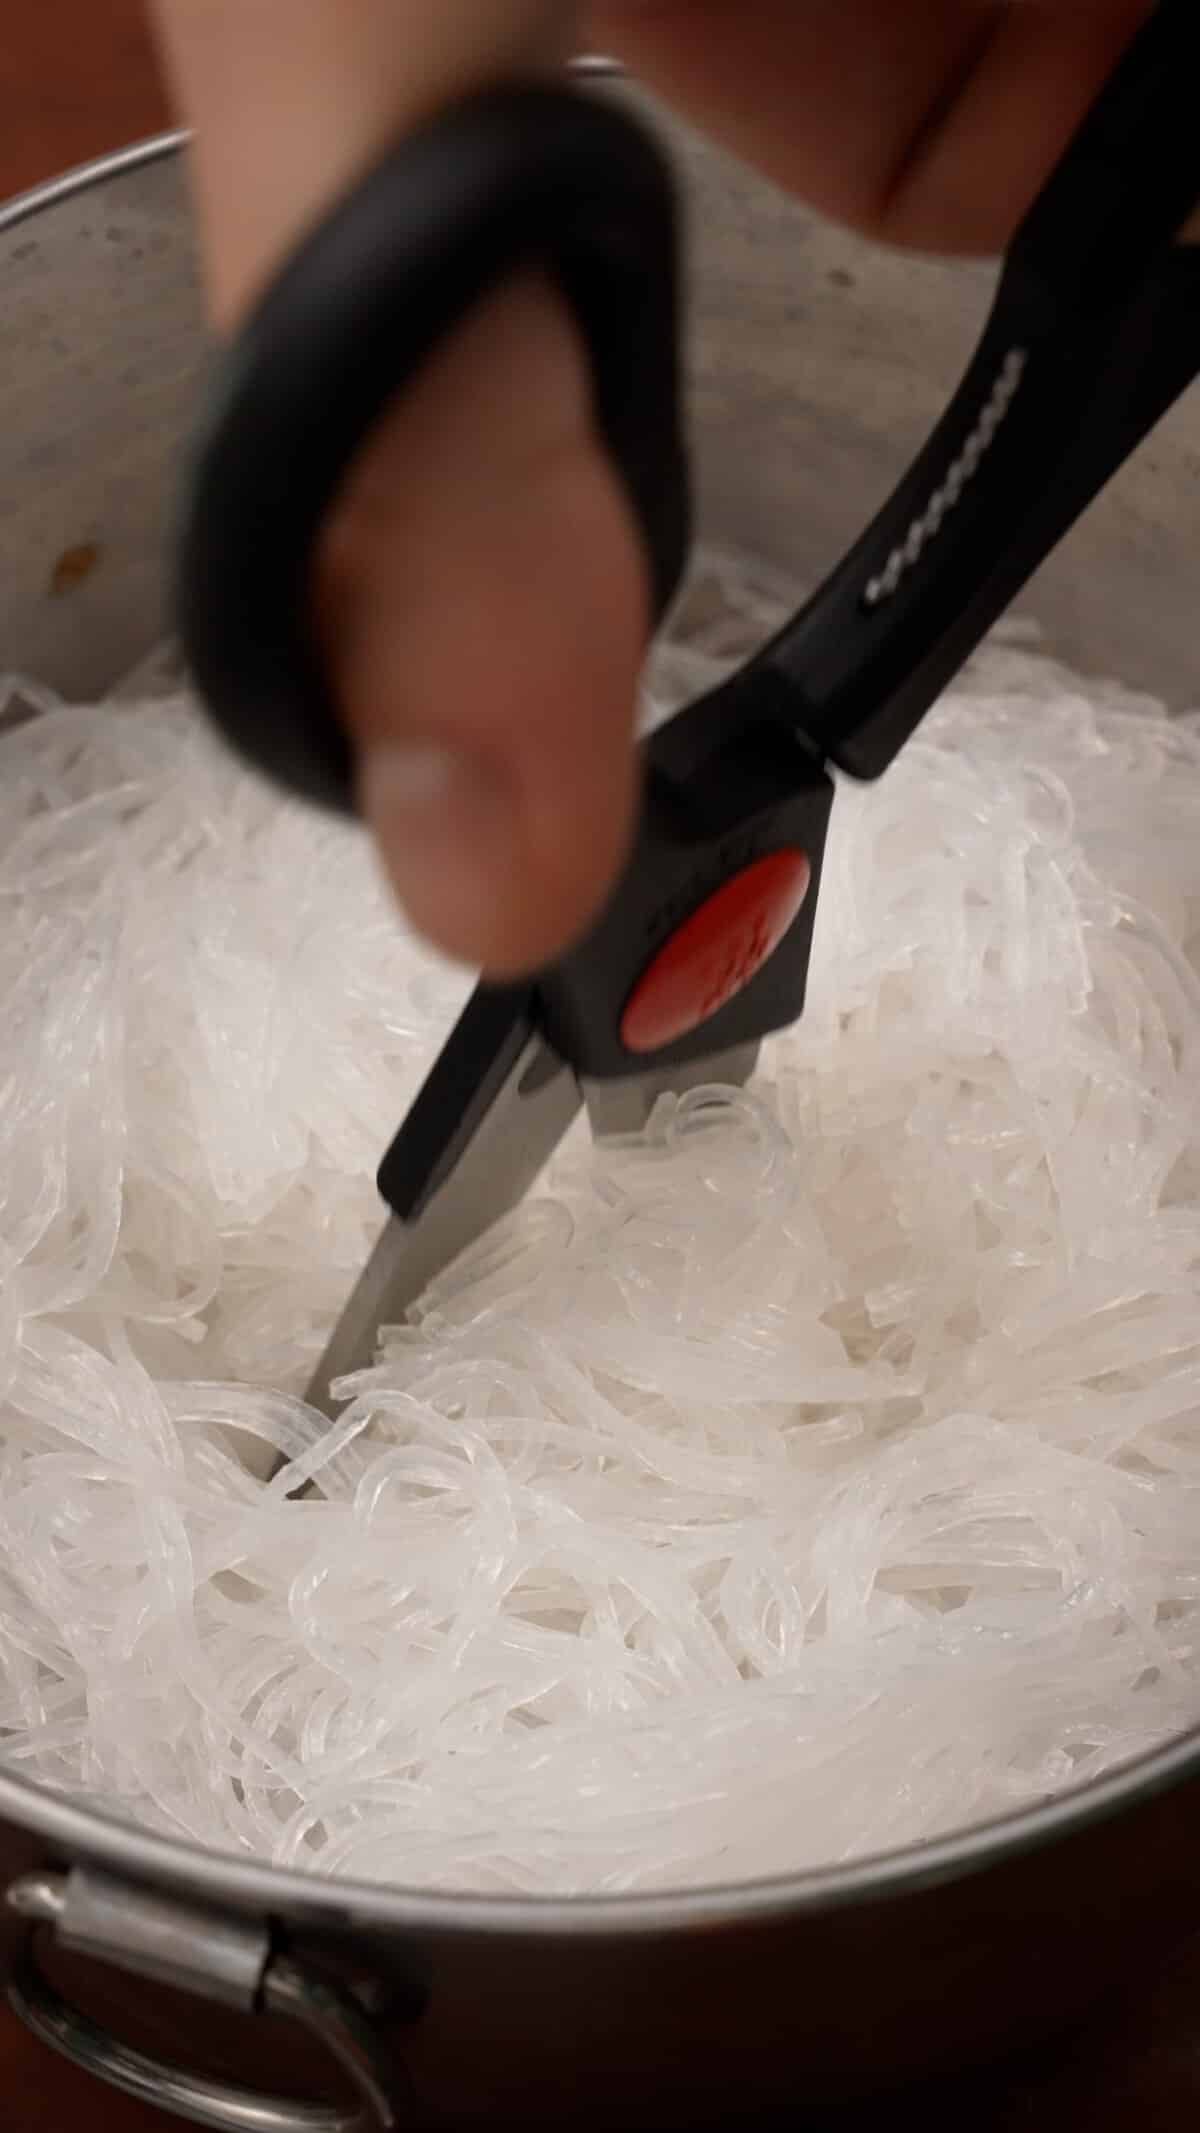 A pair of scissors cutting the rehydrated vermicelli noodles.